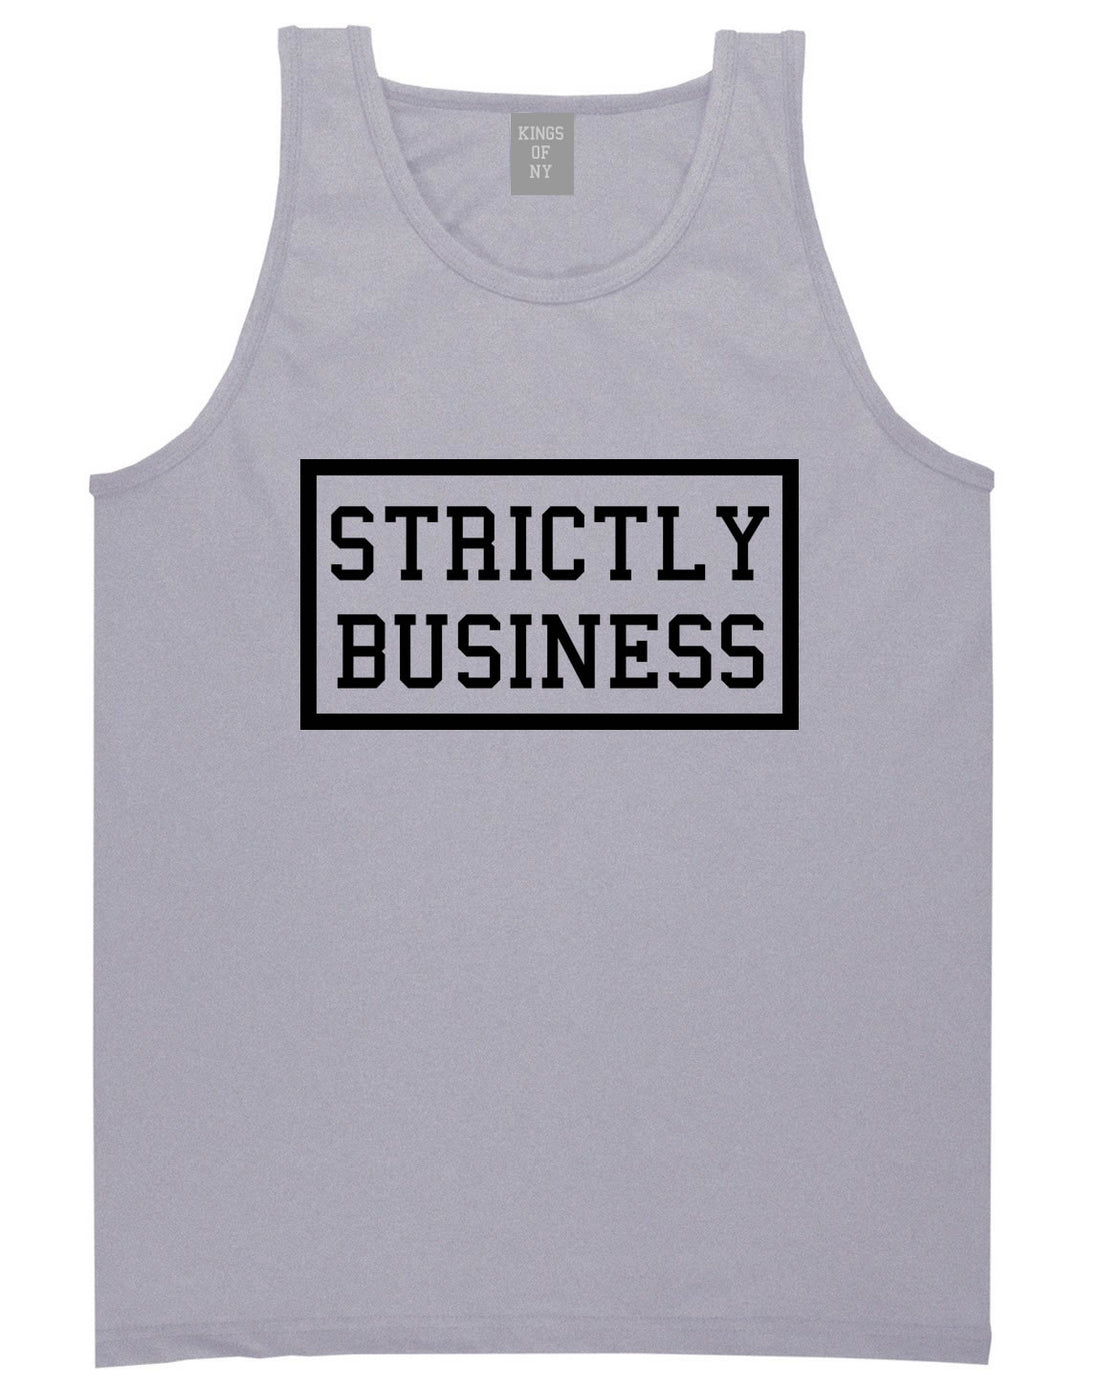 Strictly Business Tank Top in Grey by Kings Of NY